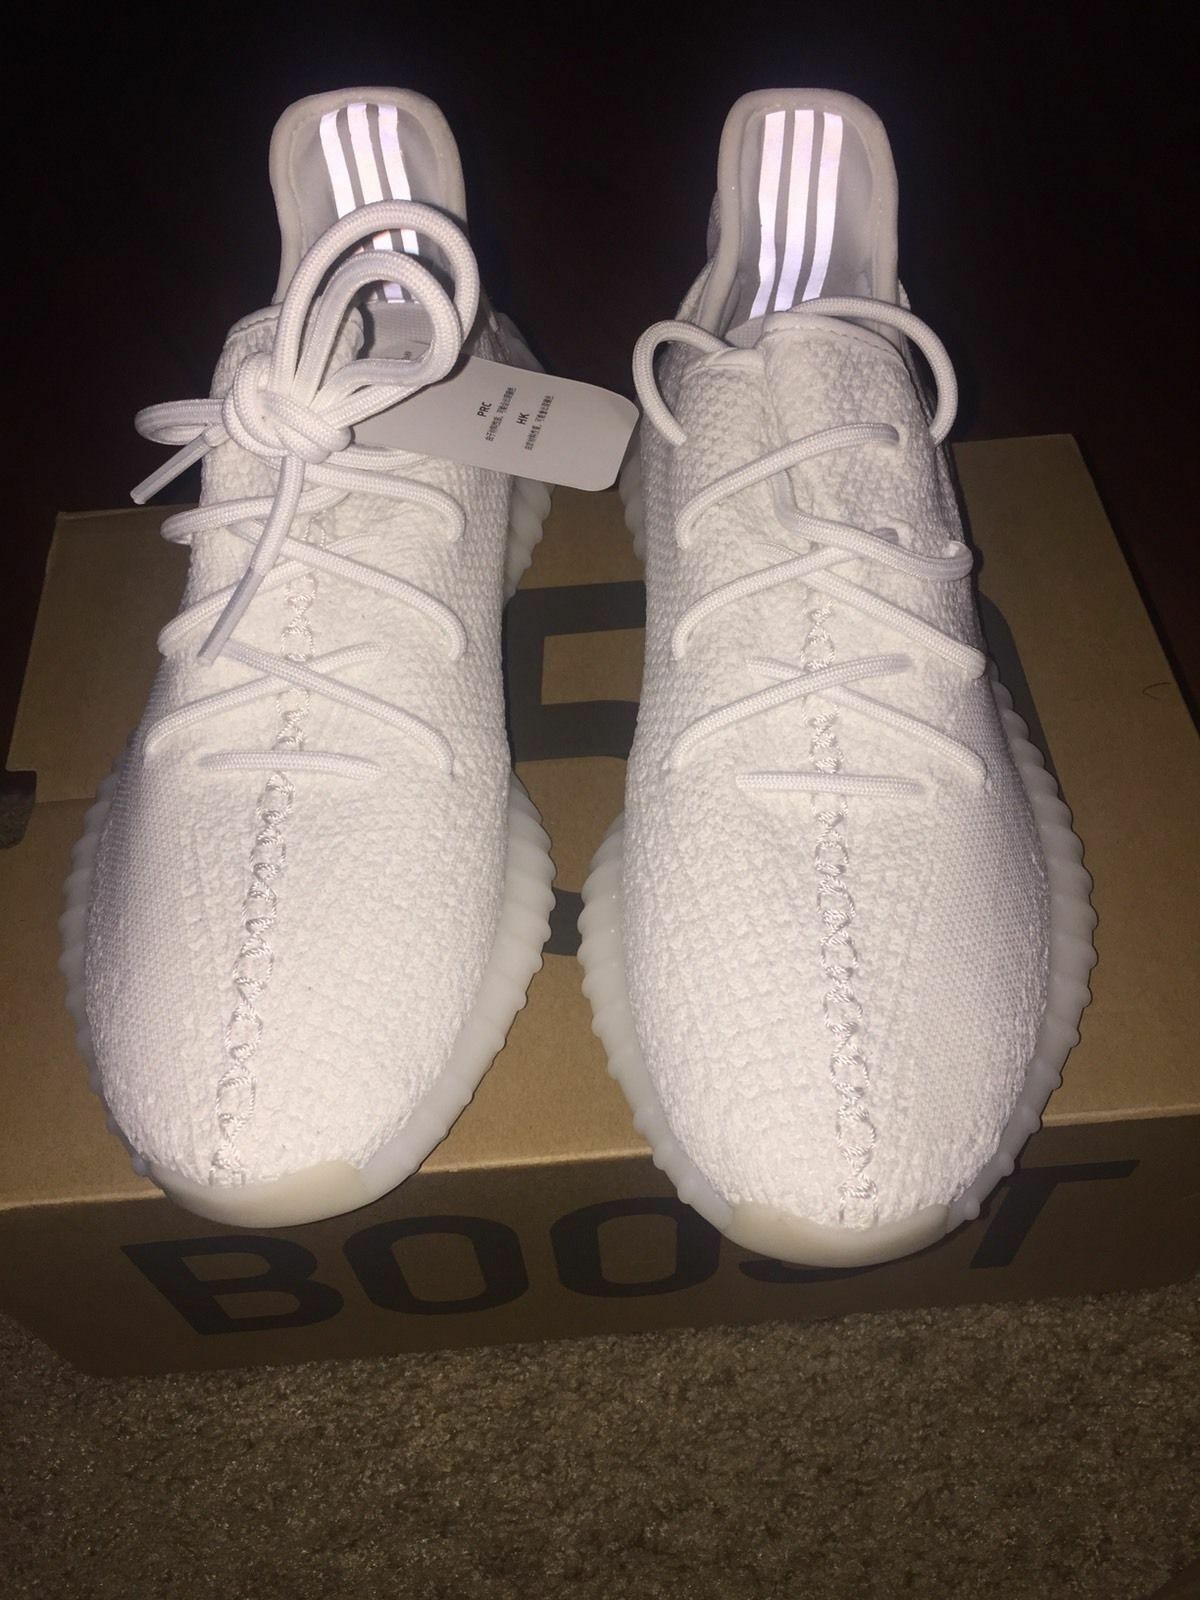 Styre Mitt chap Adidas Kanye West Yeezy Boost 350 V2 Cream White CP9366 Mens Sneakers Size  9.5 | eBay